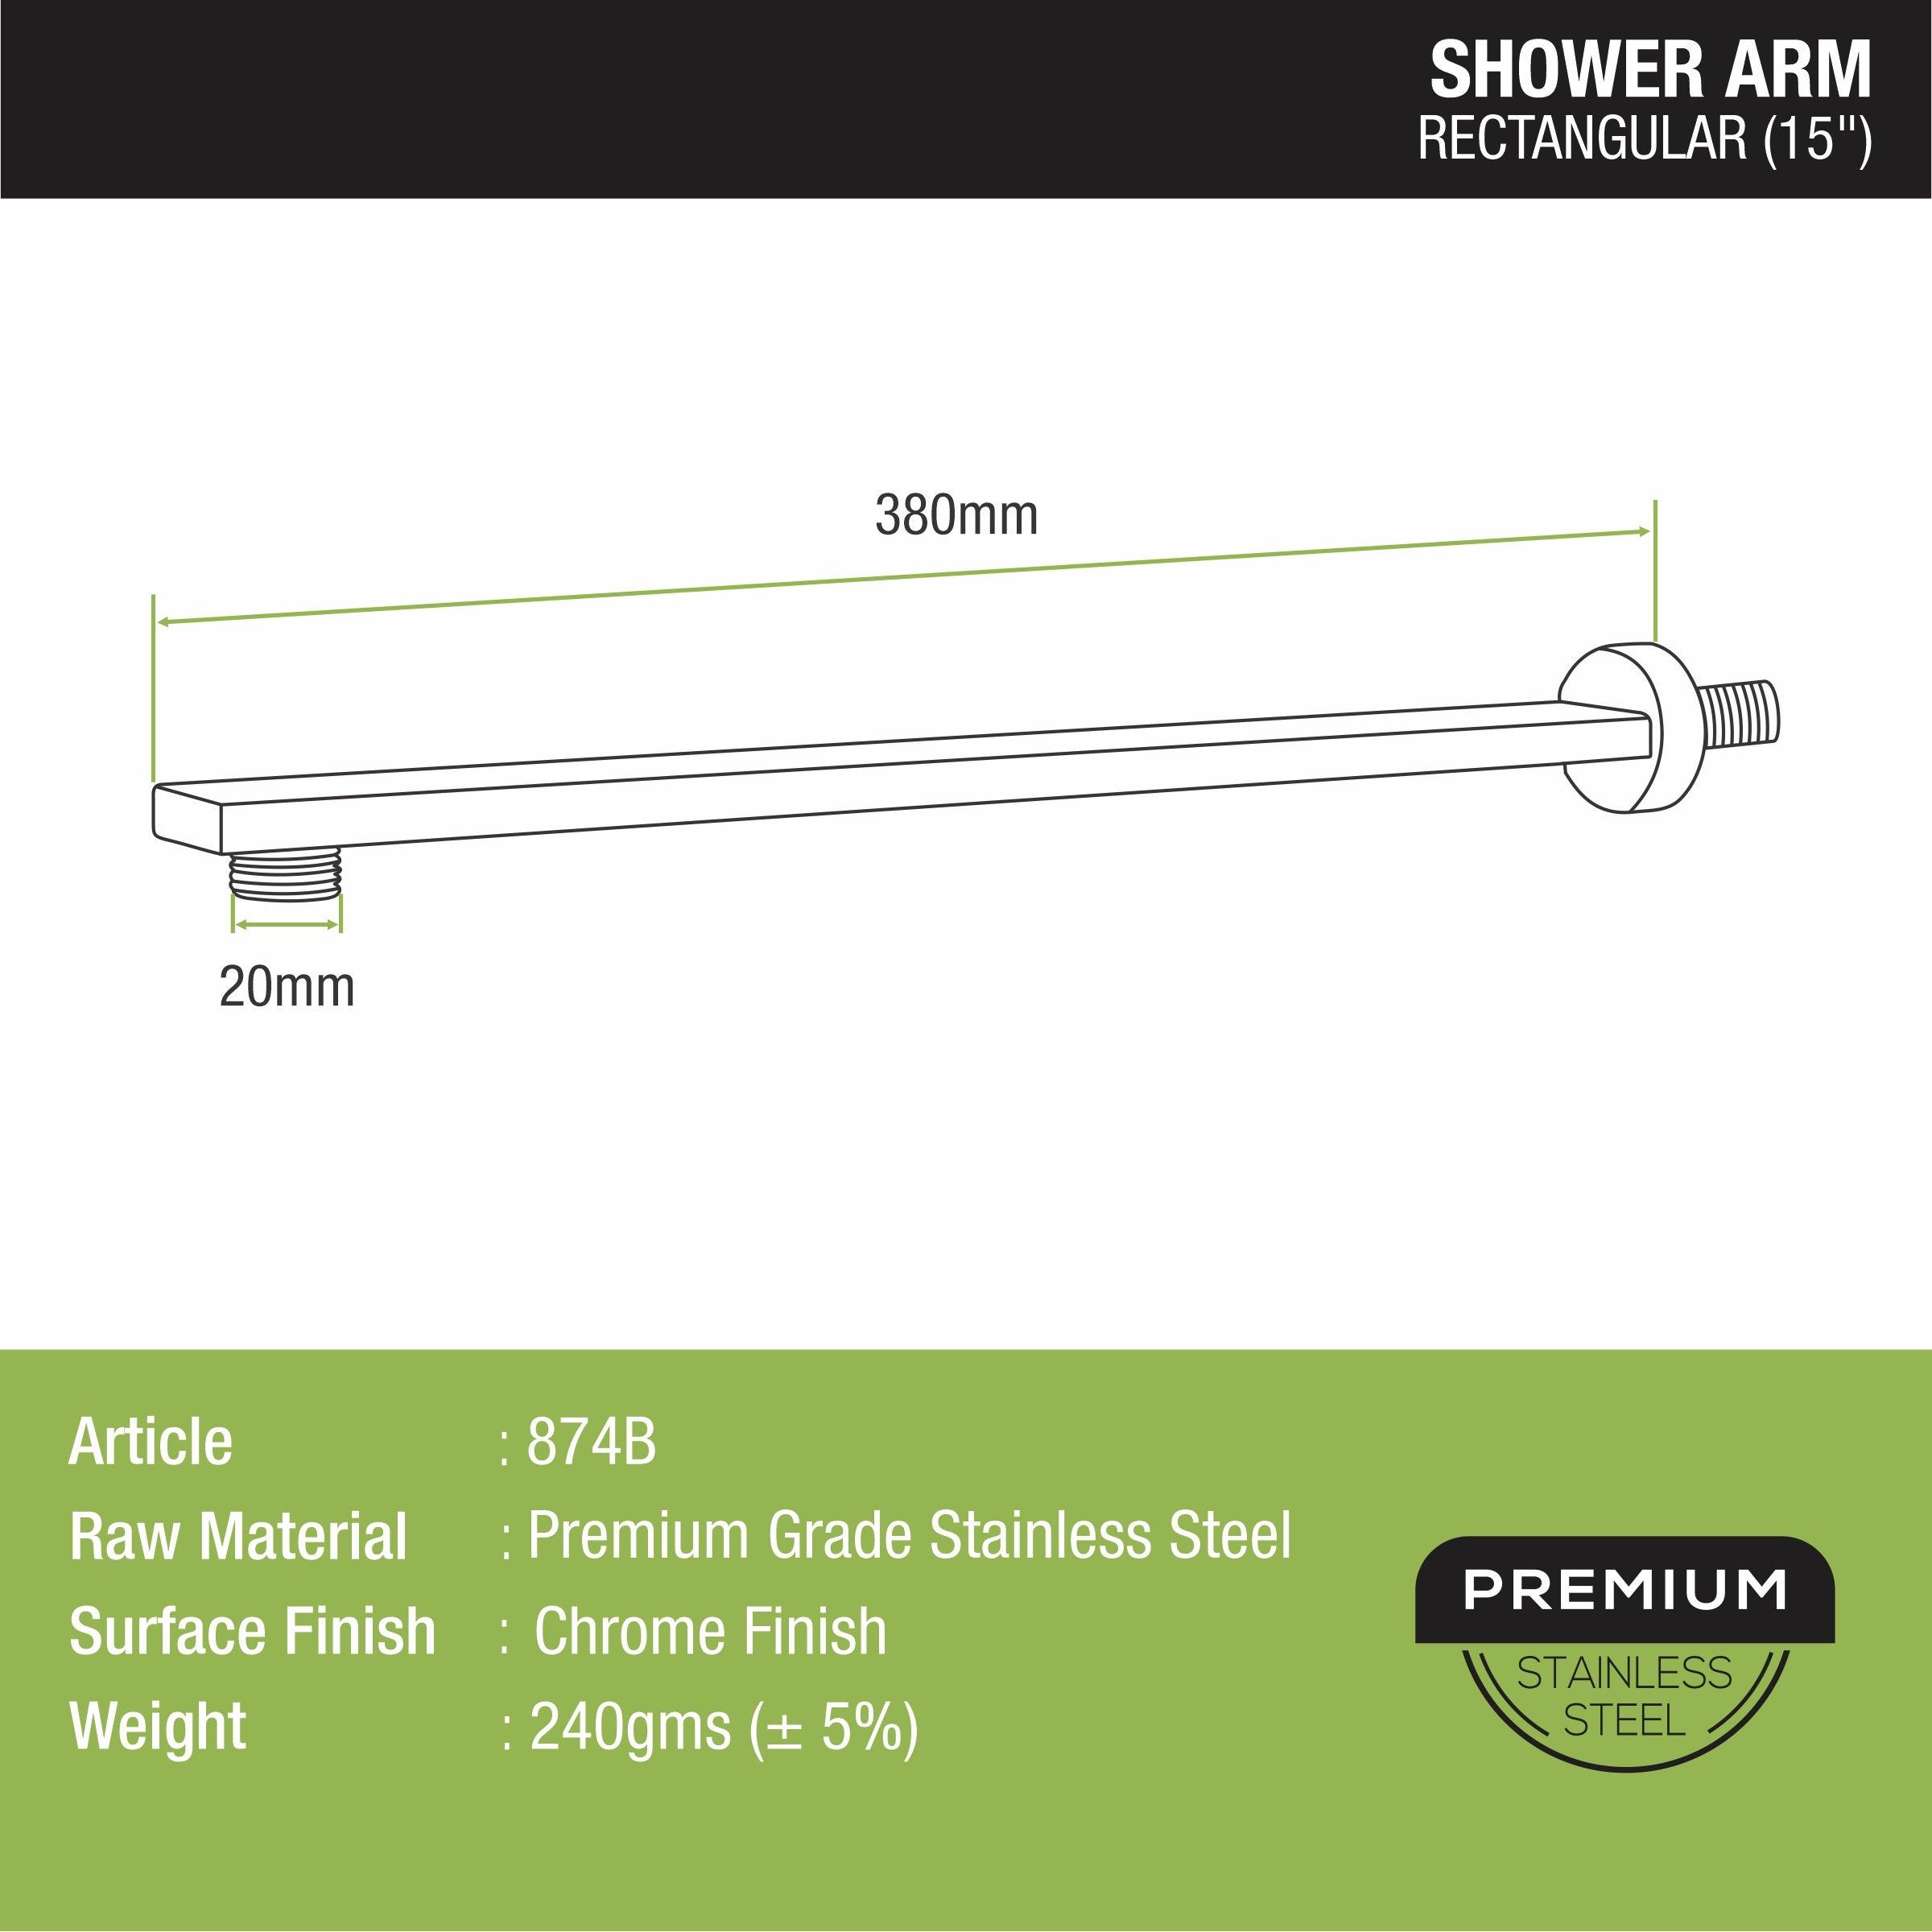 Rectangular Shower Arm (15 Inches) sizes and dimensions